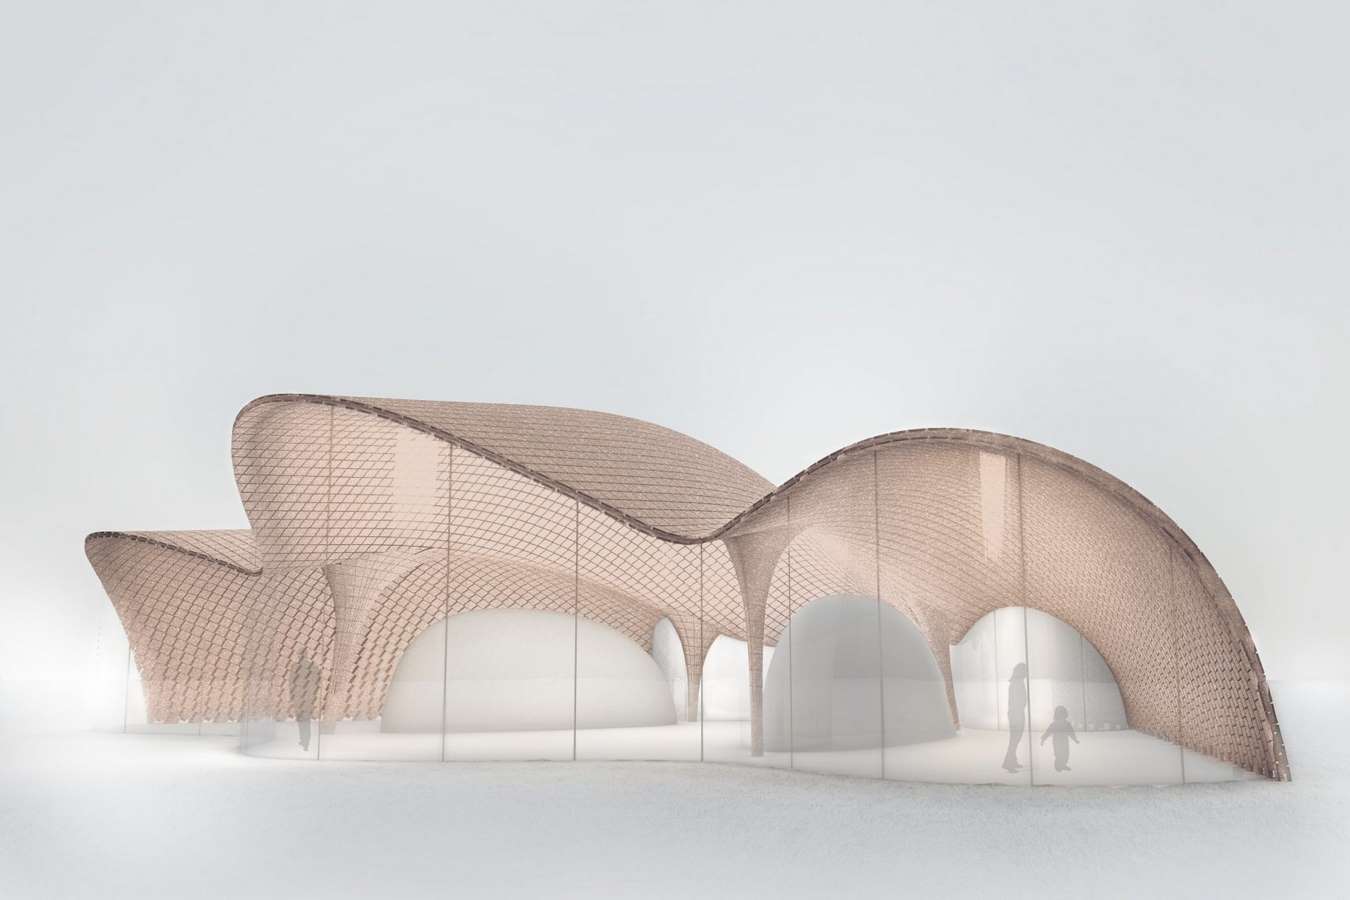 Abalone House with Carbon dioxide absorbent roof tiles_ ©ExplorationArchitecture